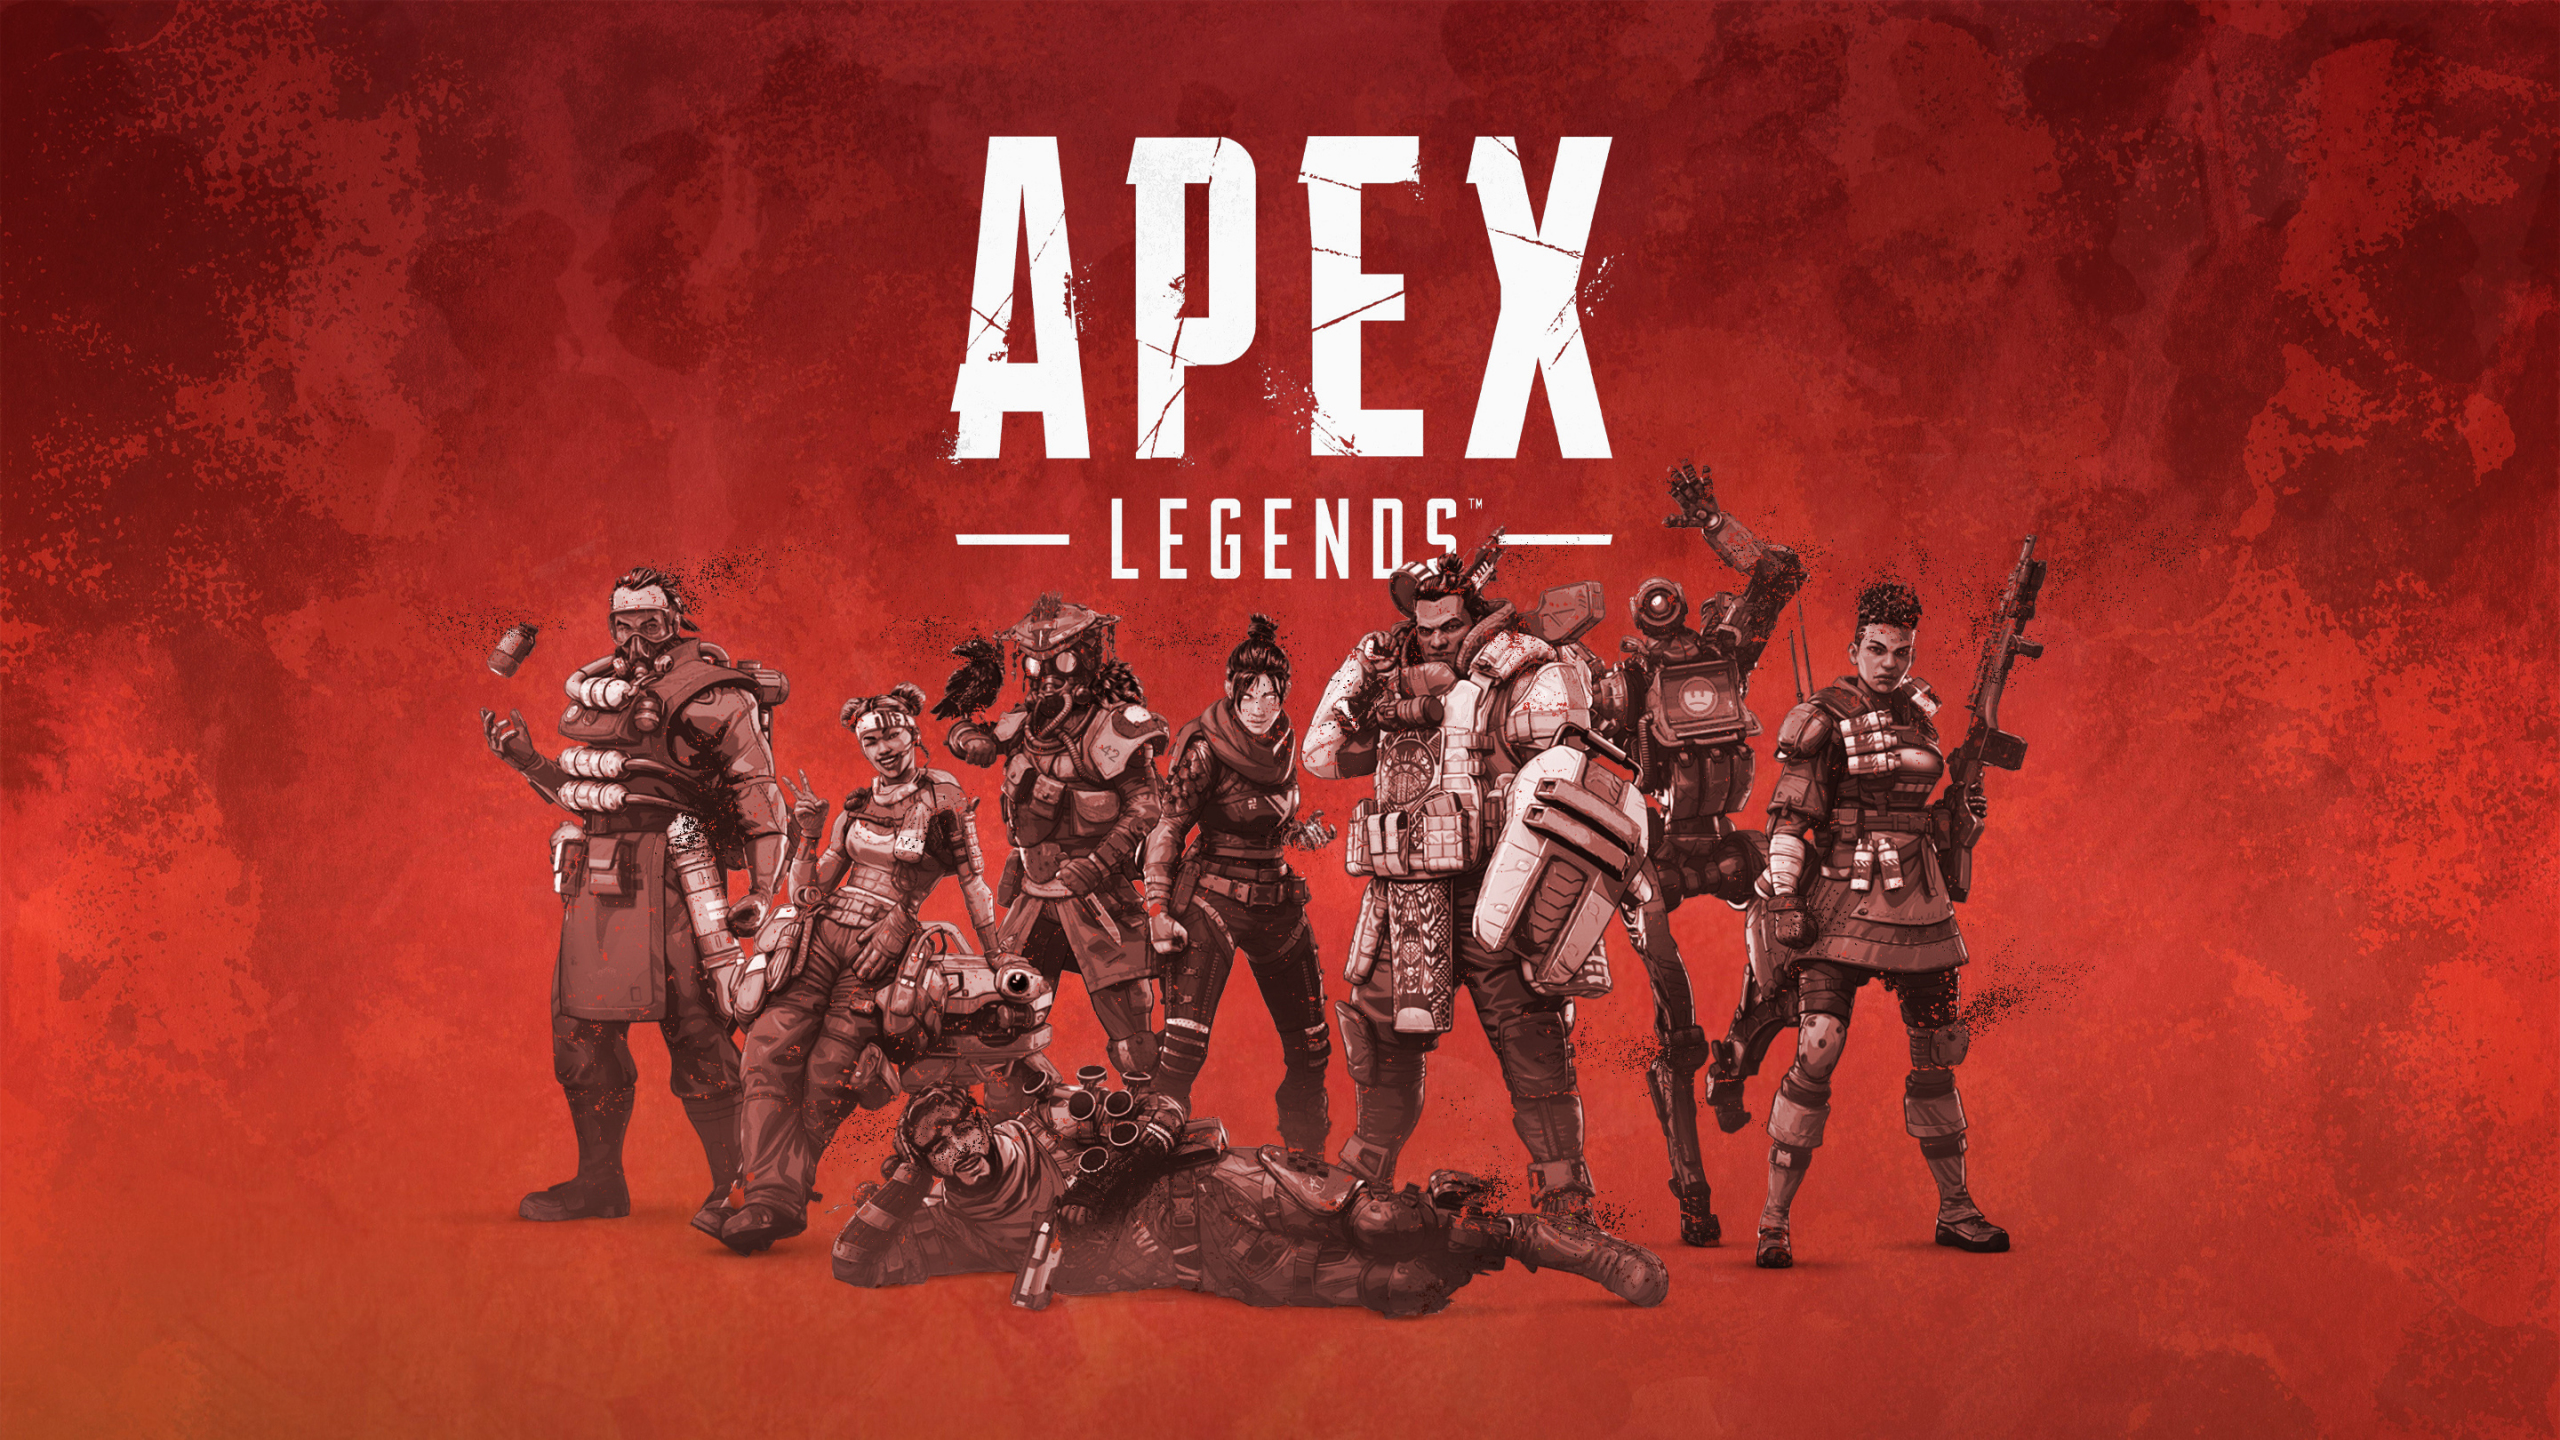 Download Poster Video Game 19 Apex Legends 2560x1440 Wallpaper Dual Wide 16 9 2560x1440 Hd Image Background